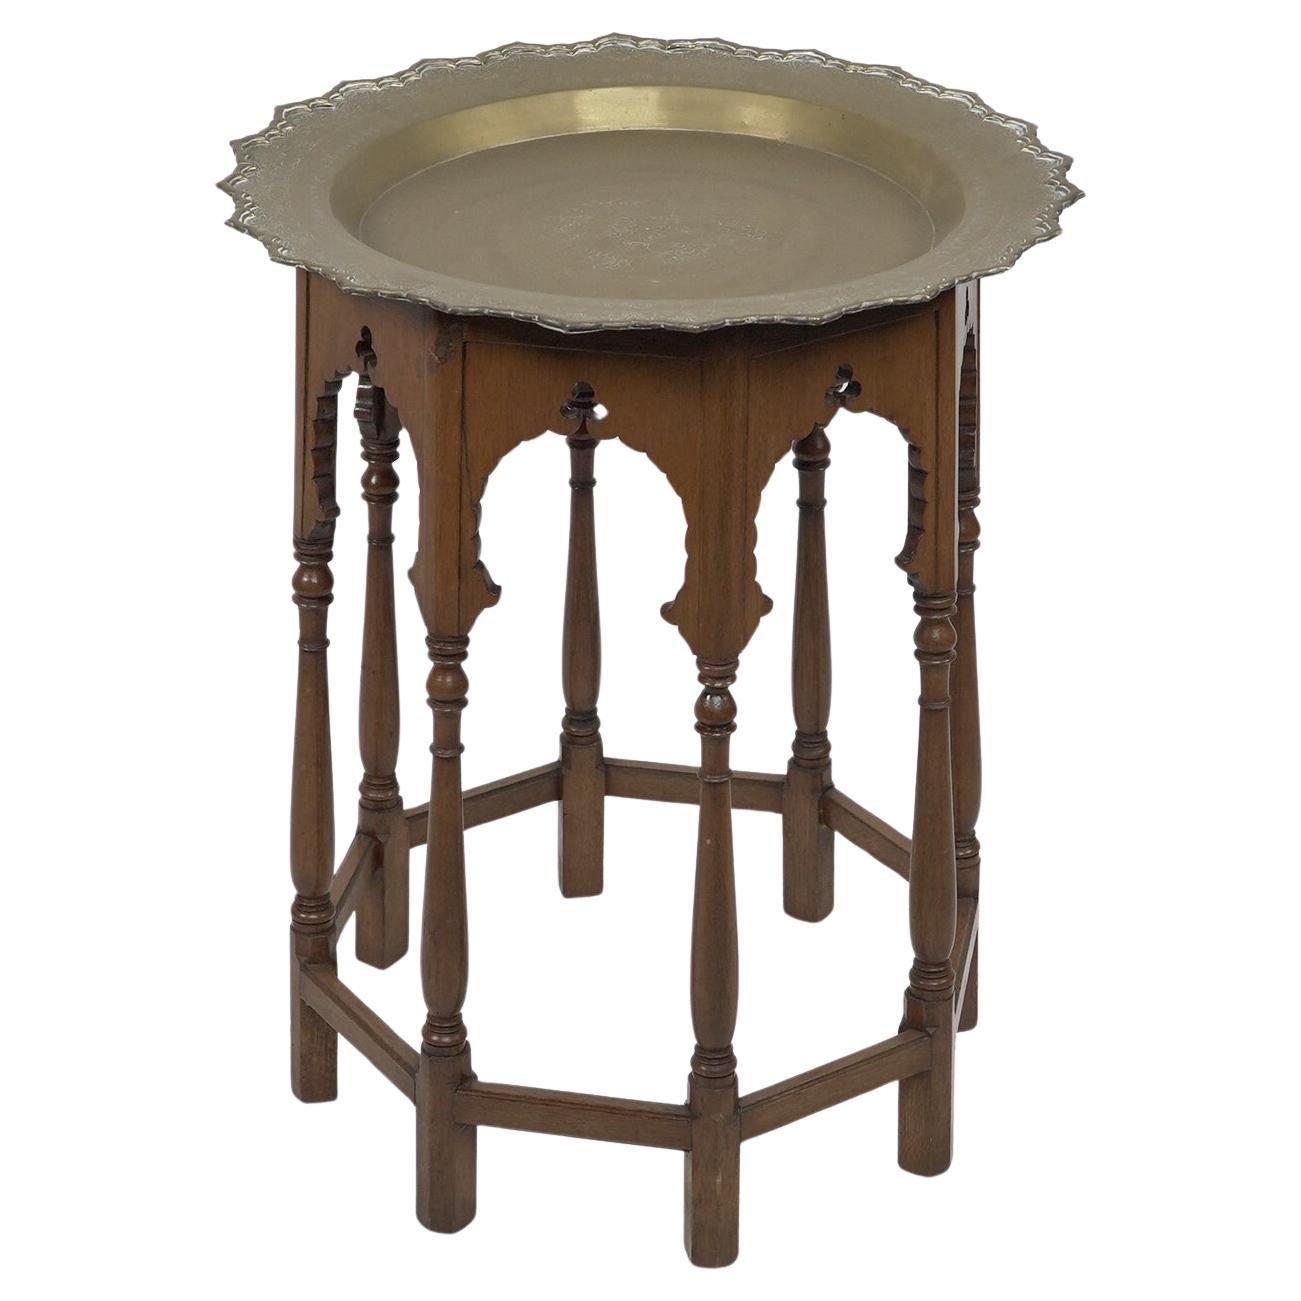 A Moorish-style side table with a heavy brass removable dish-shaped table top